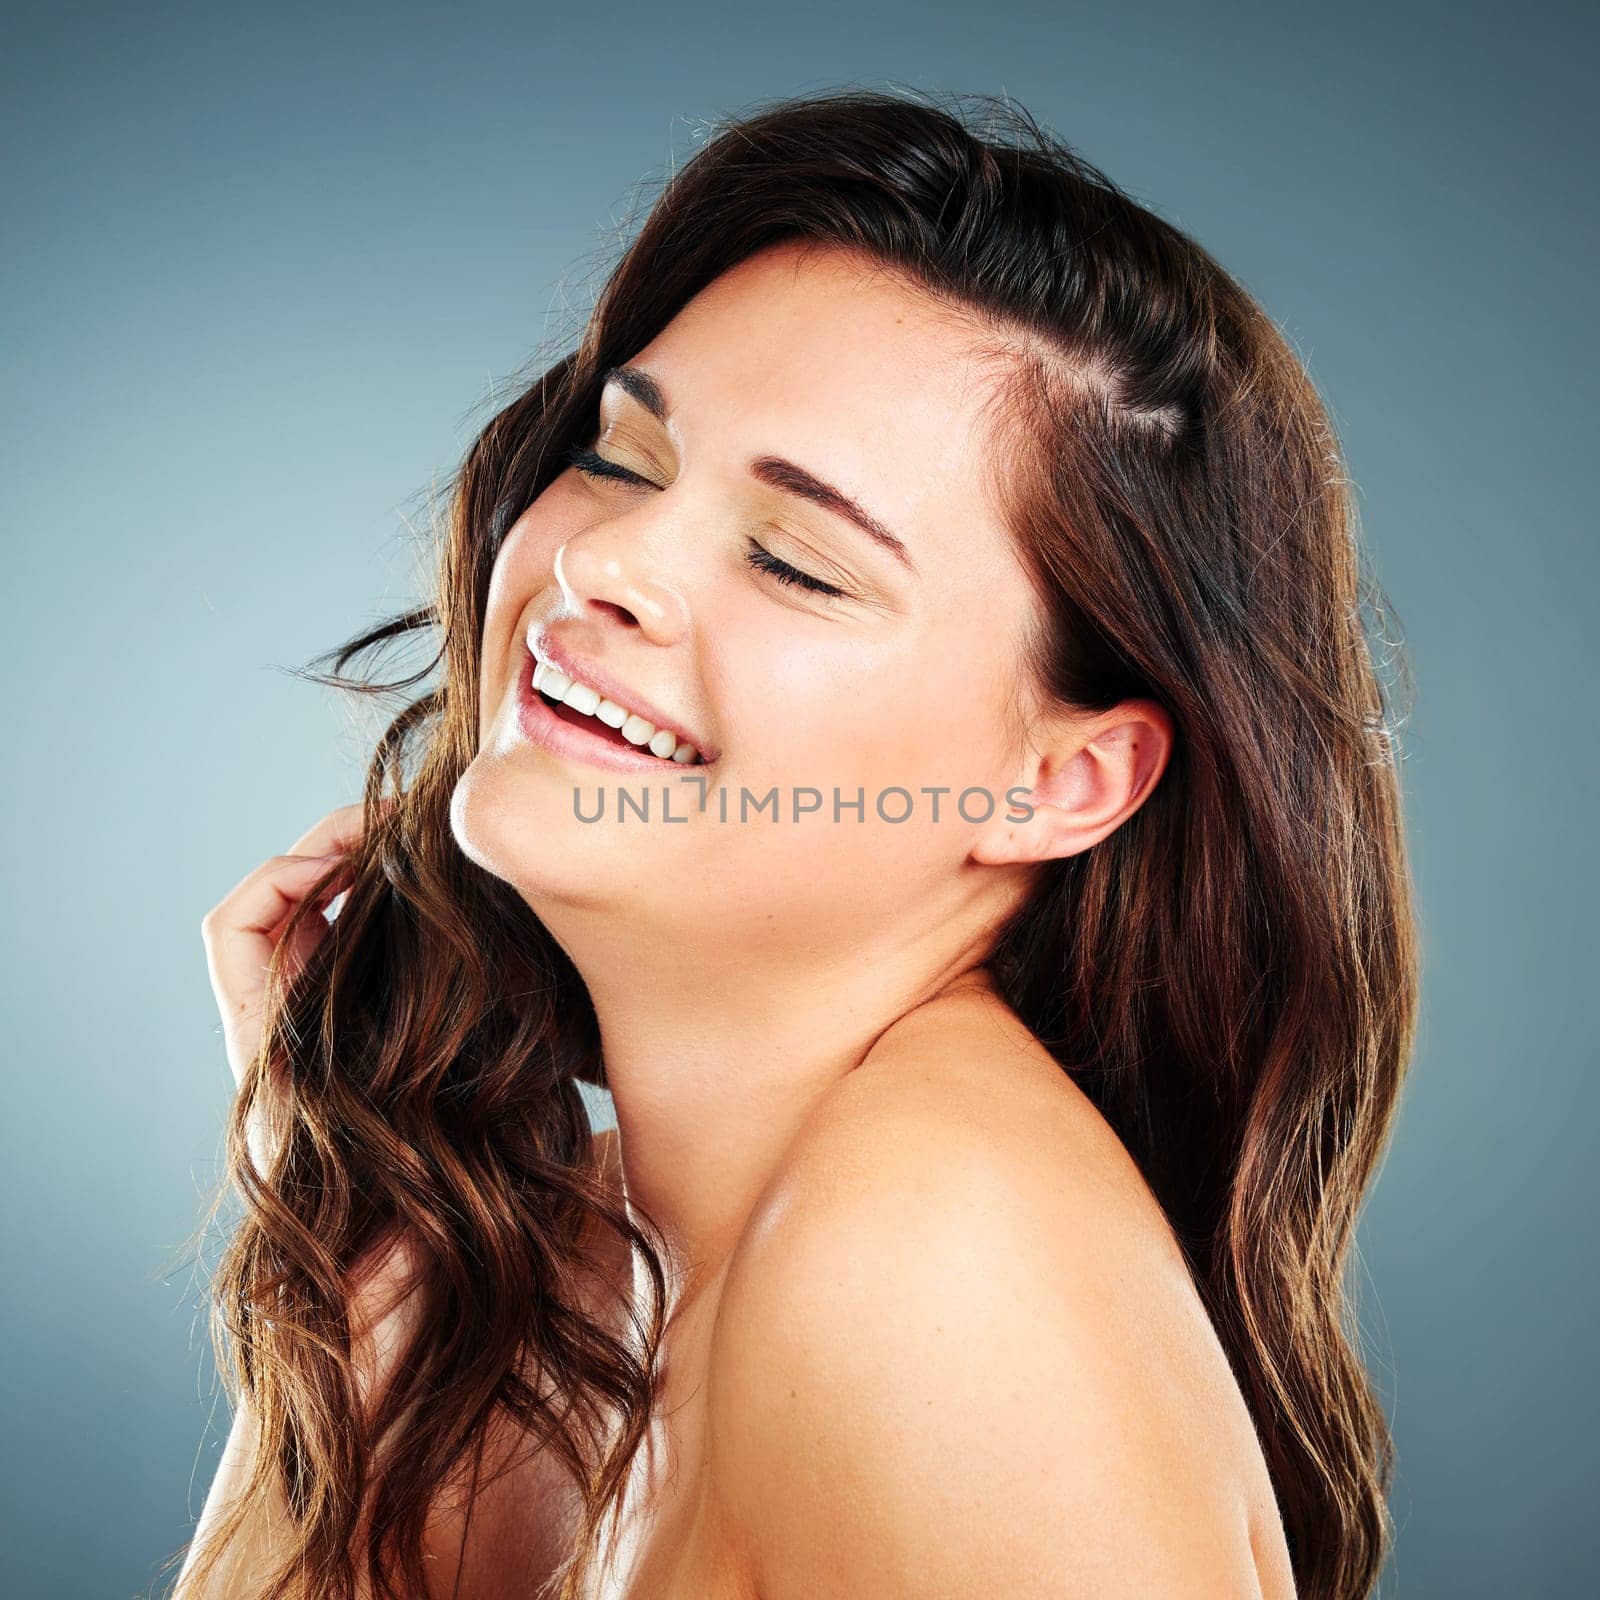 Beauty, skincare and hair care of woman in studio happy about cosmetics, makeup and keratin shampoo for shine and growth. Face of aesthetic model on blue background with glow from dermatology facial.